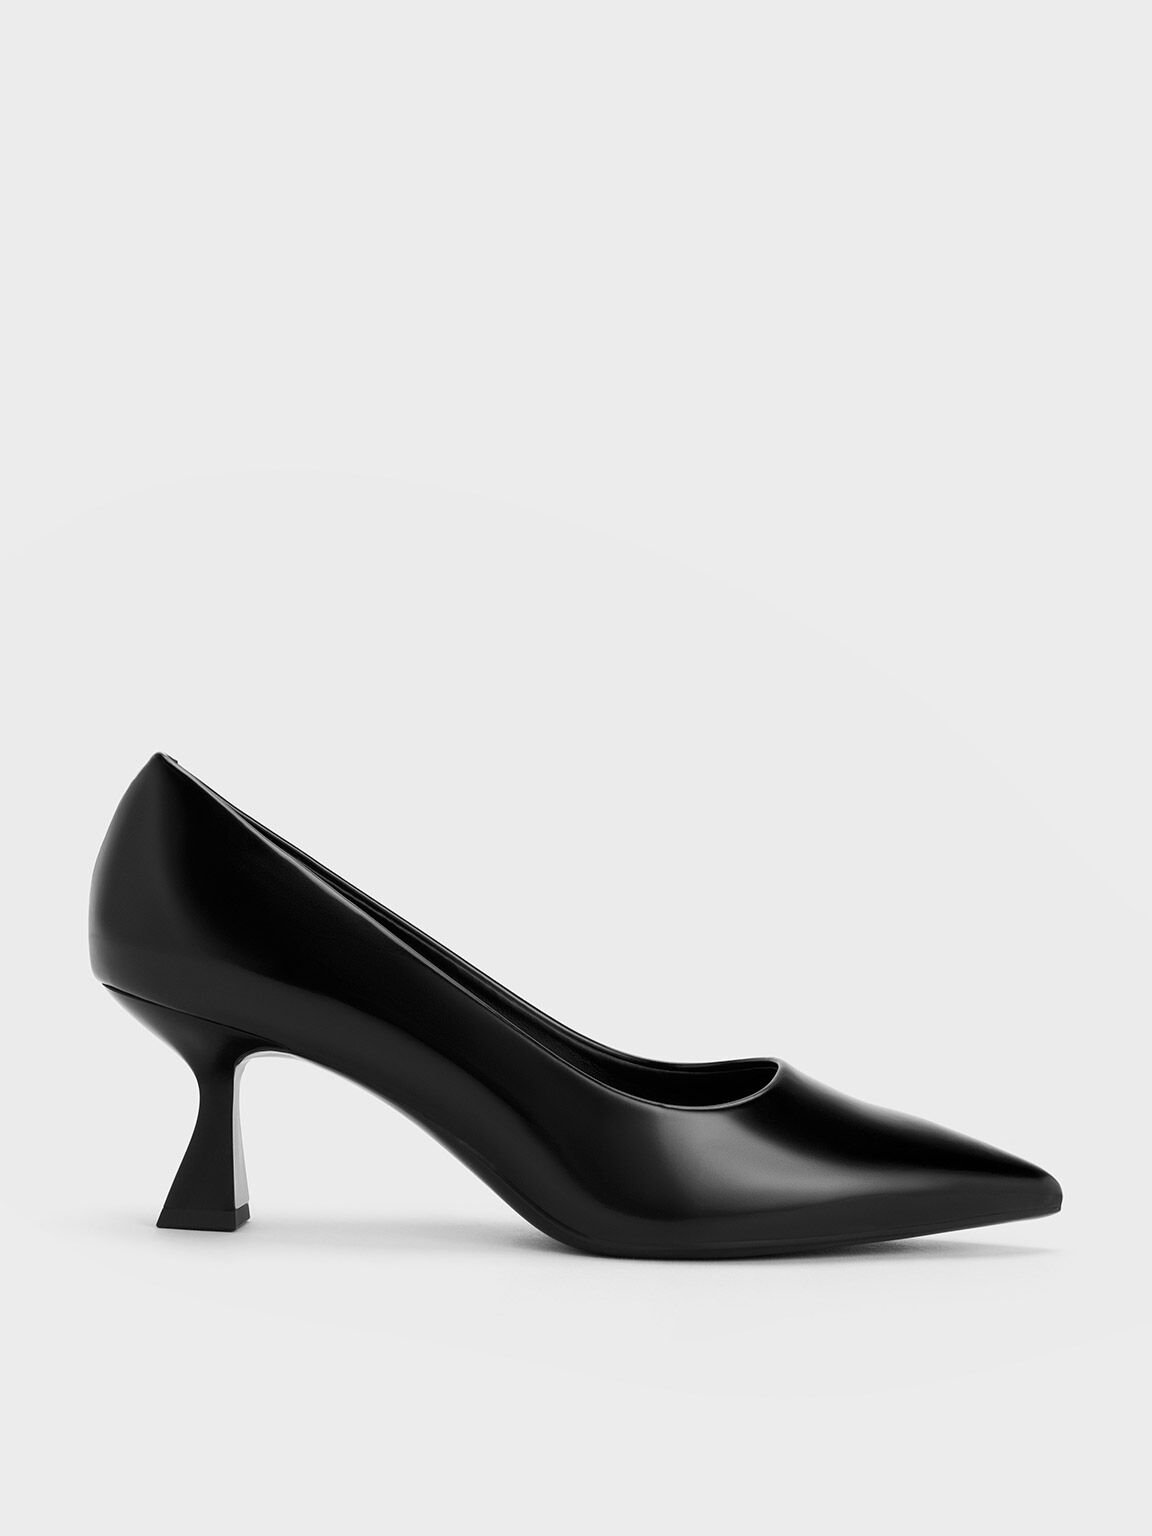 Black Boxed Pointed-Toe Flare Heel Pumps - CHARLES & KEITH SG